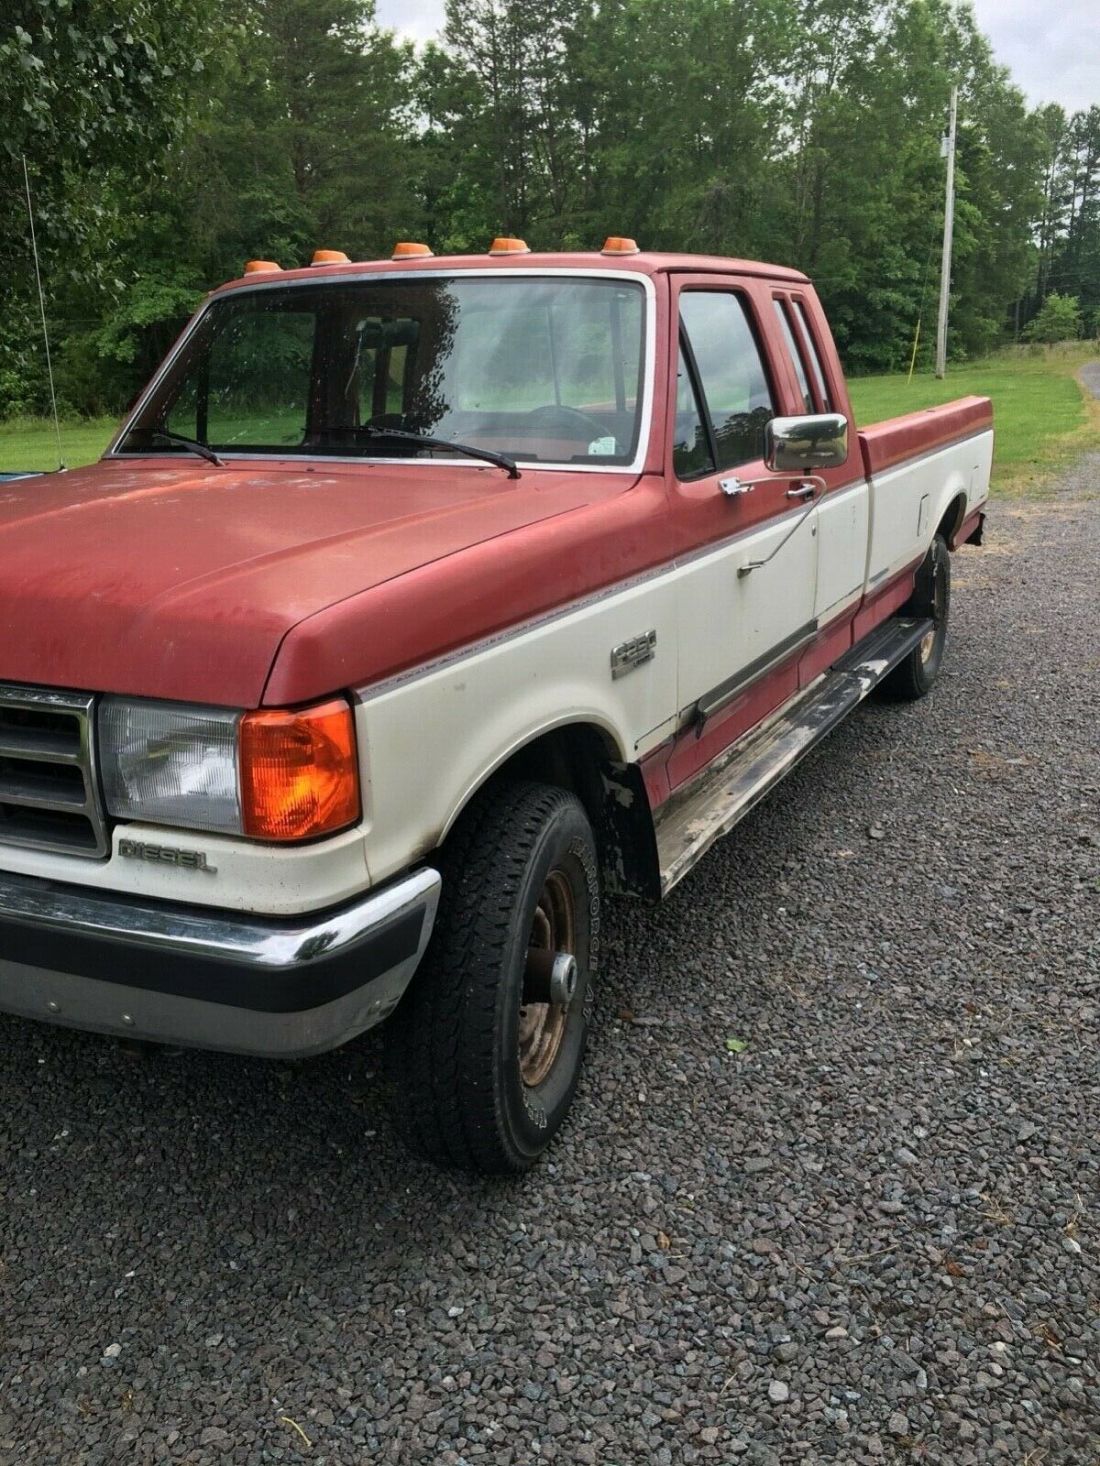 1989 Ford F-250 XLT Lariat Pickup Red 4WD Automatic - for sale - Ford F